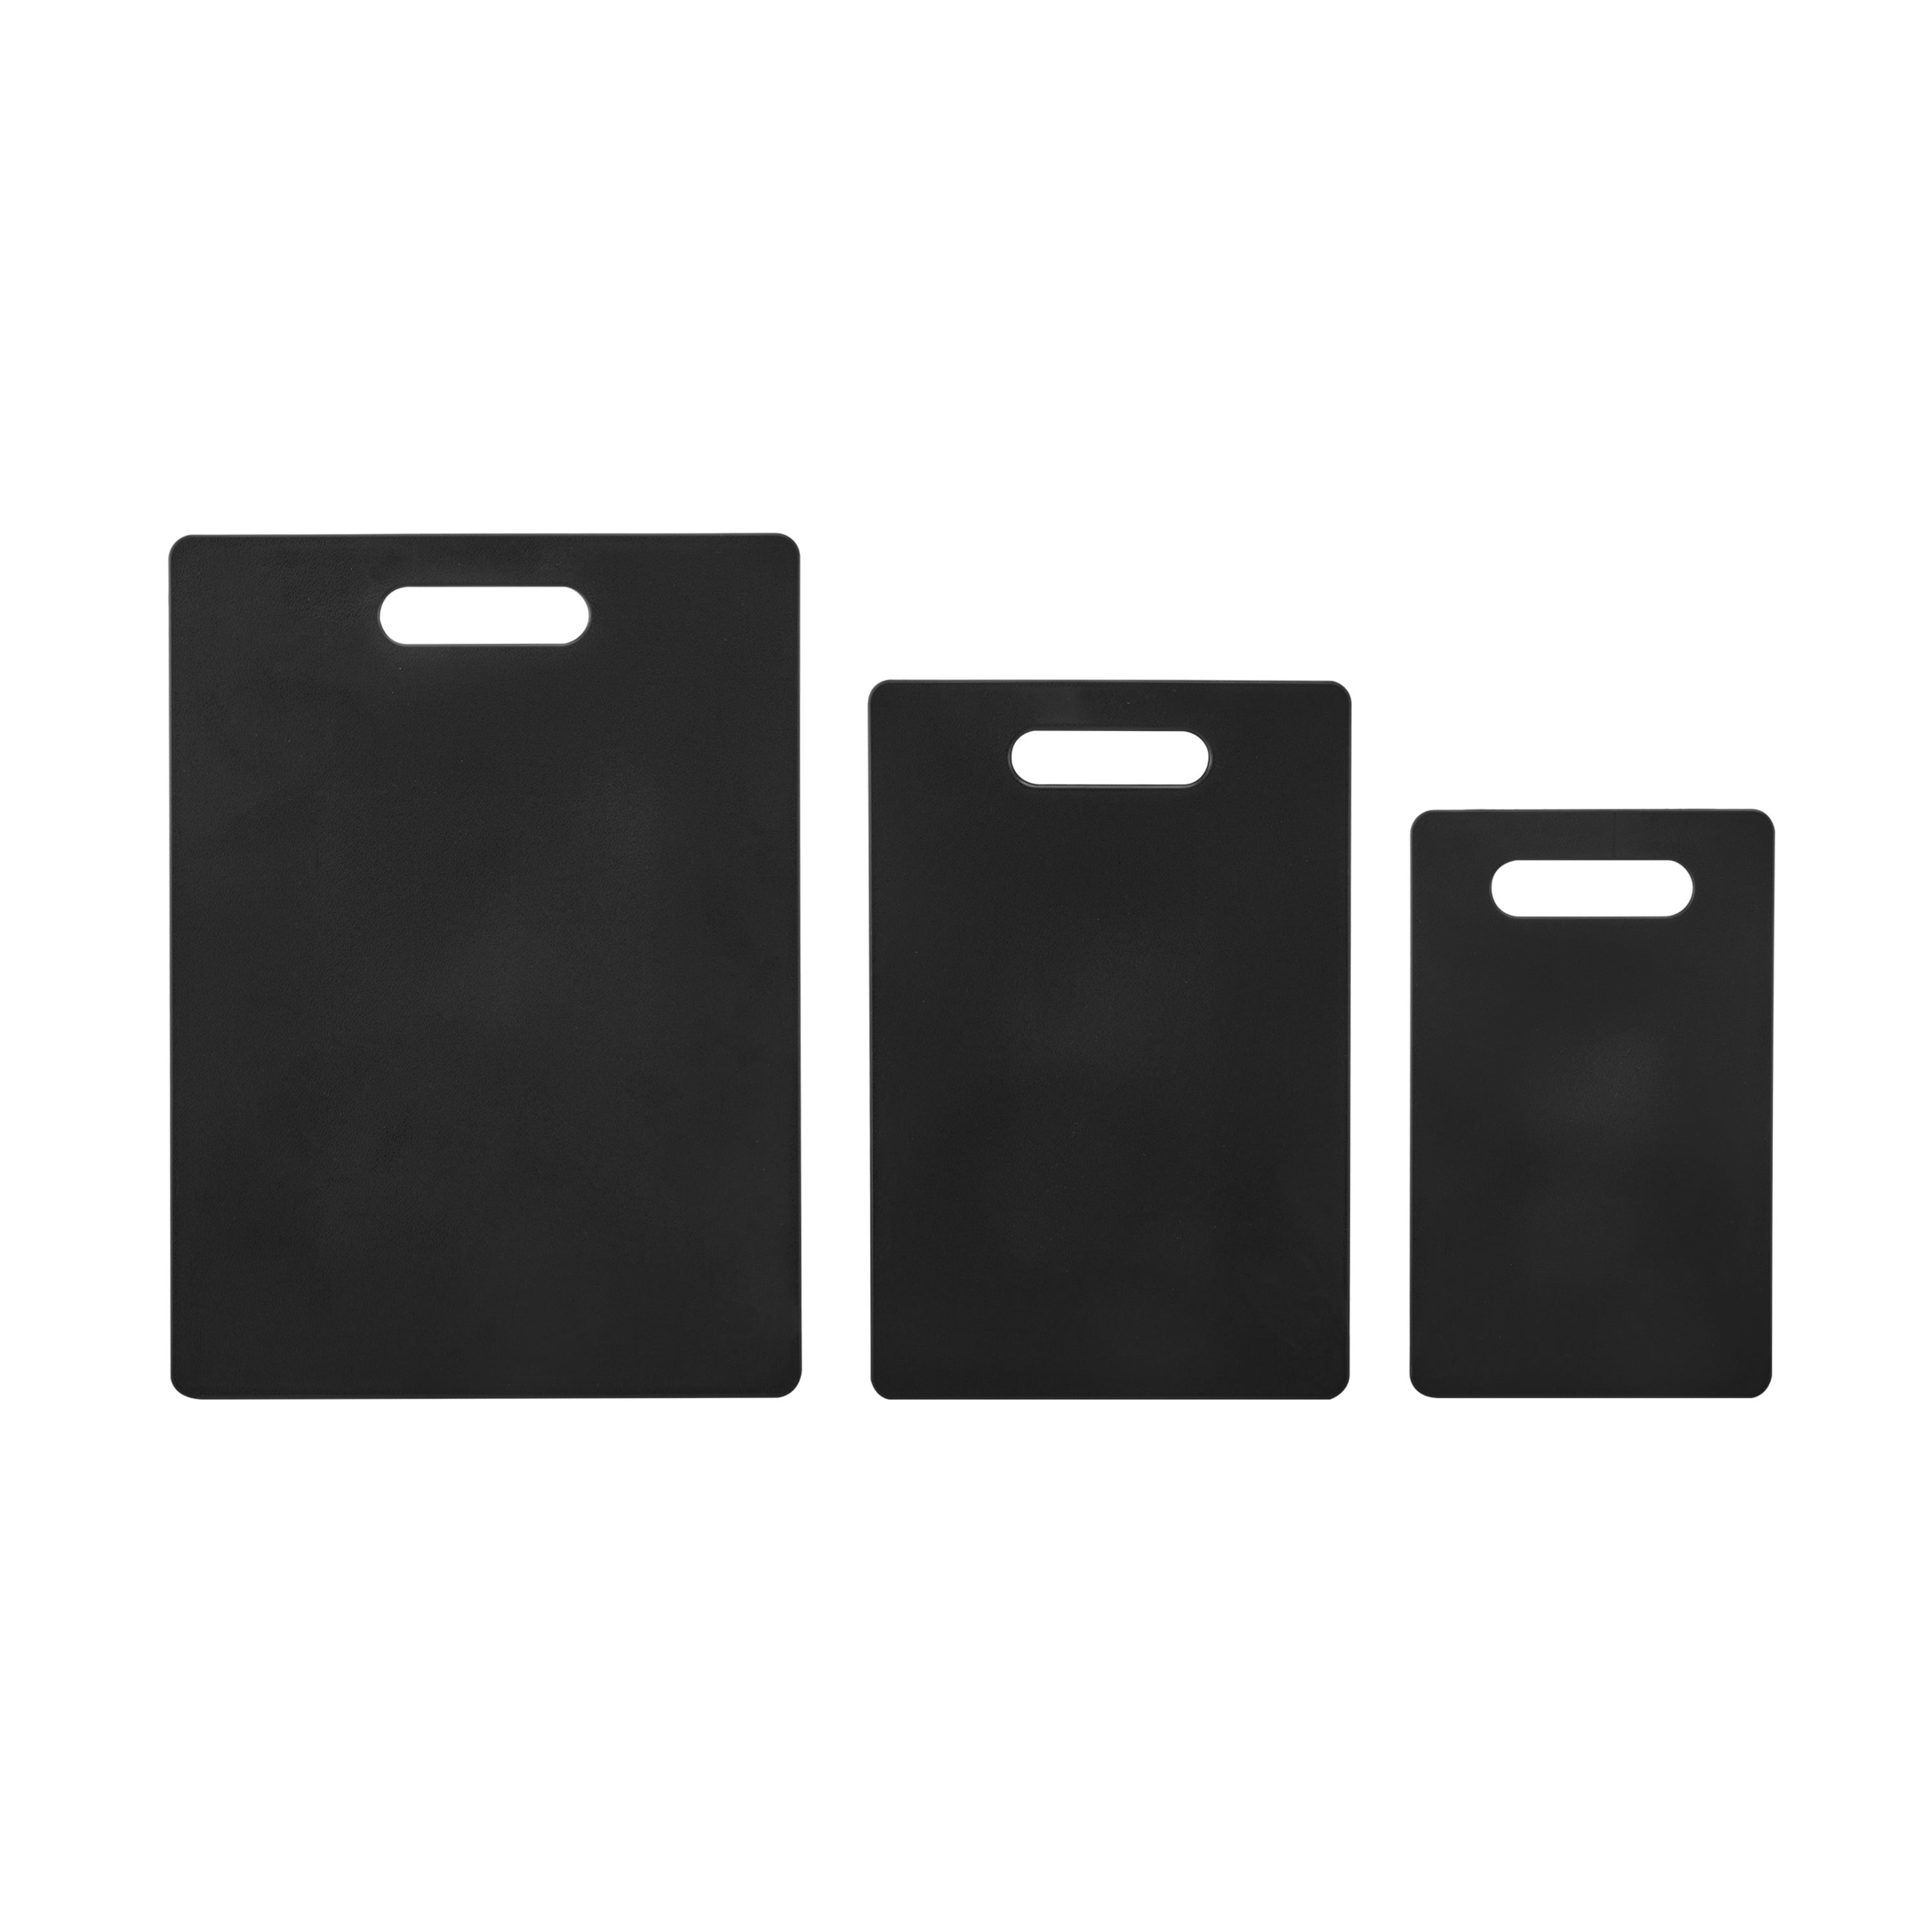  3/4 Black Poly Cutting Board - A Cut Above the Rest!